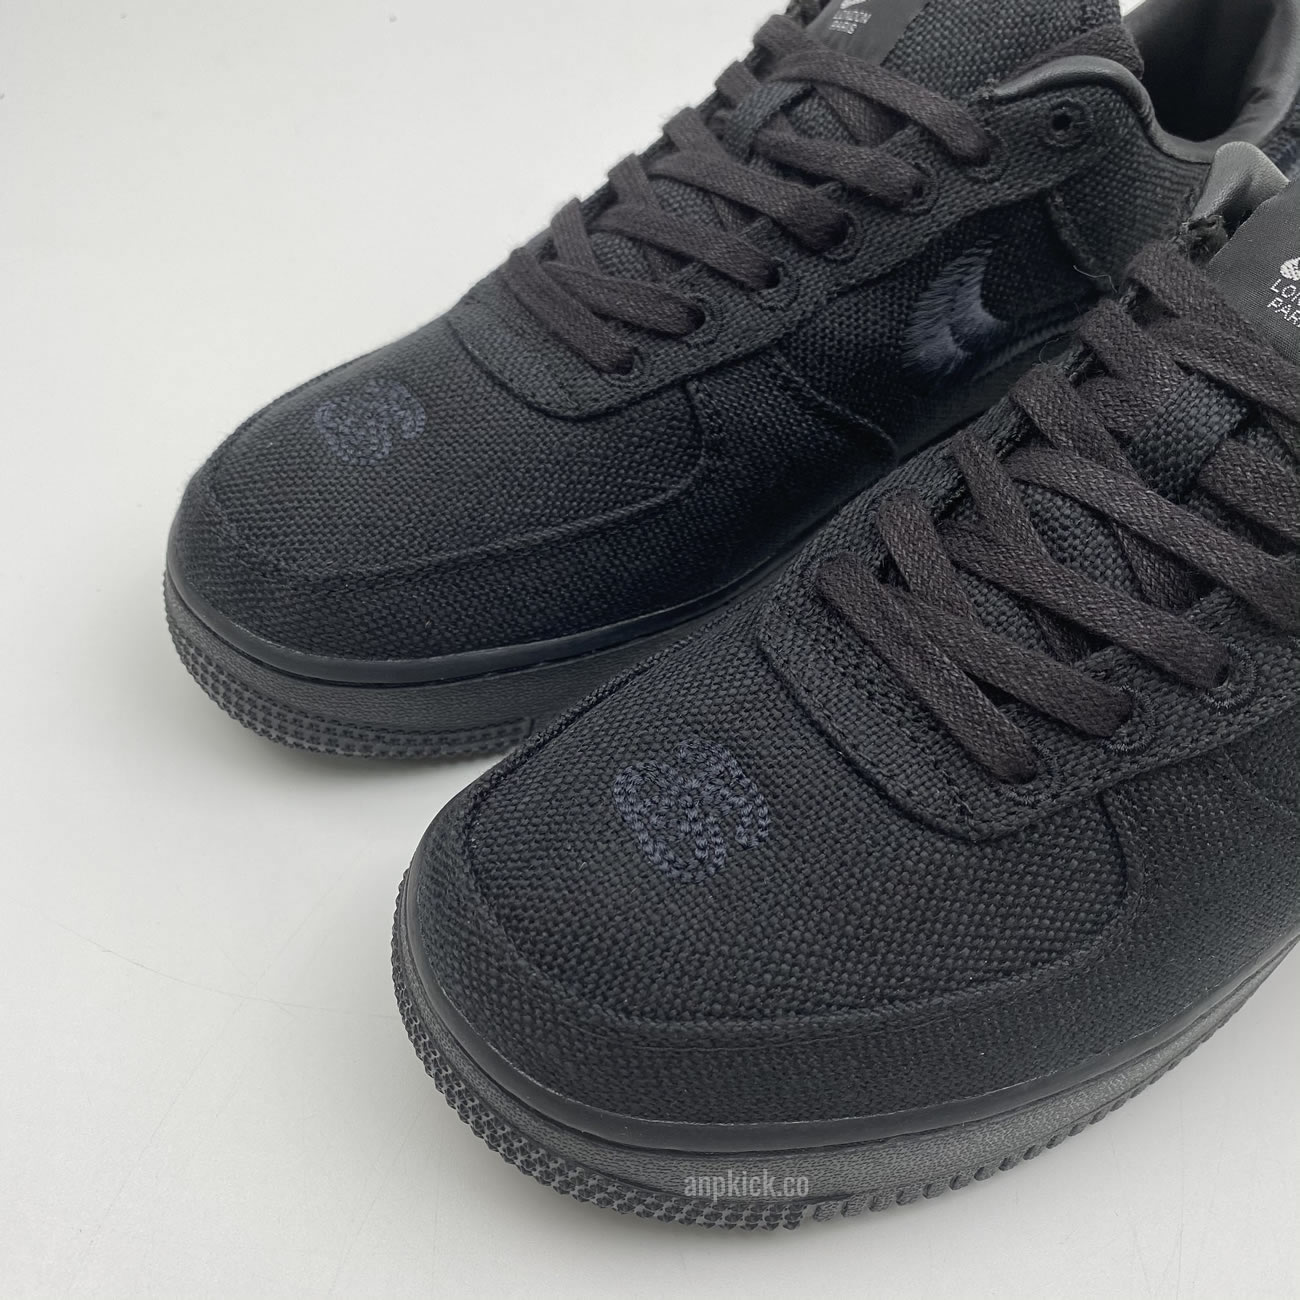 Stussy Nike Air Force 1 Low Black Cz9084 001 Release Date (6) - newkick.org